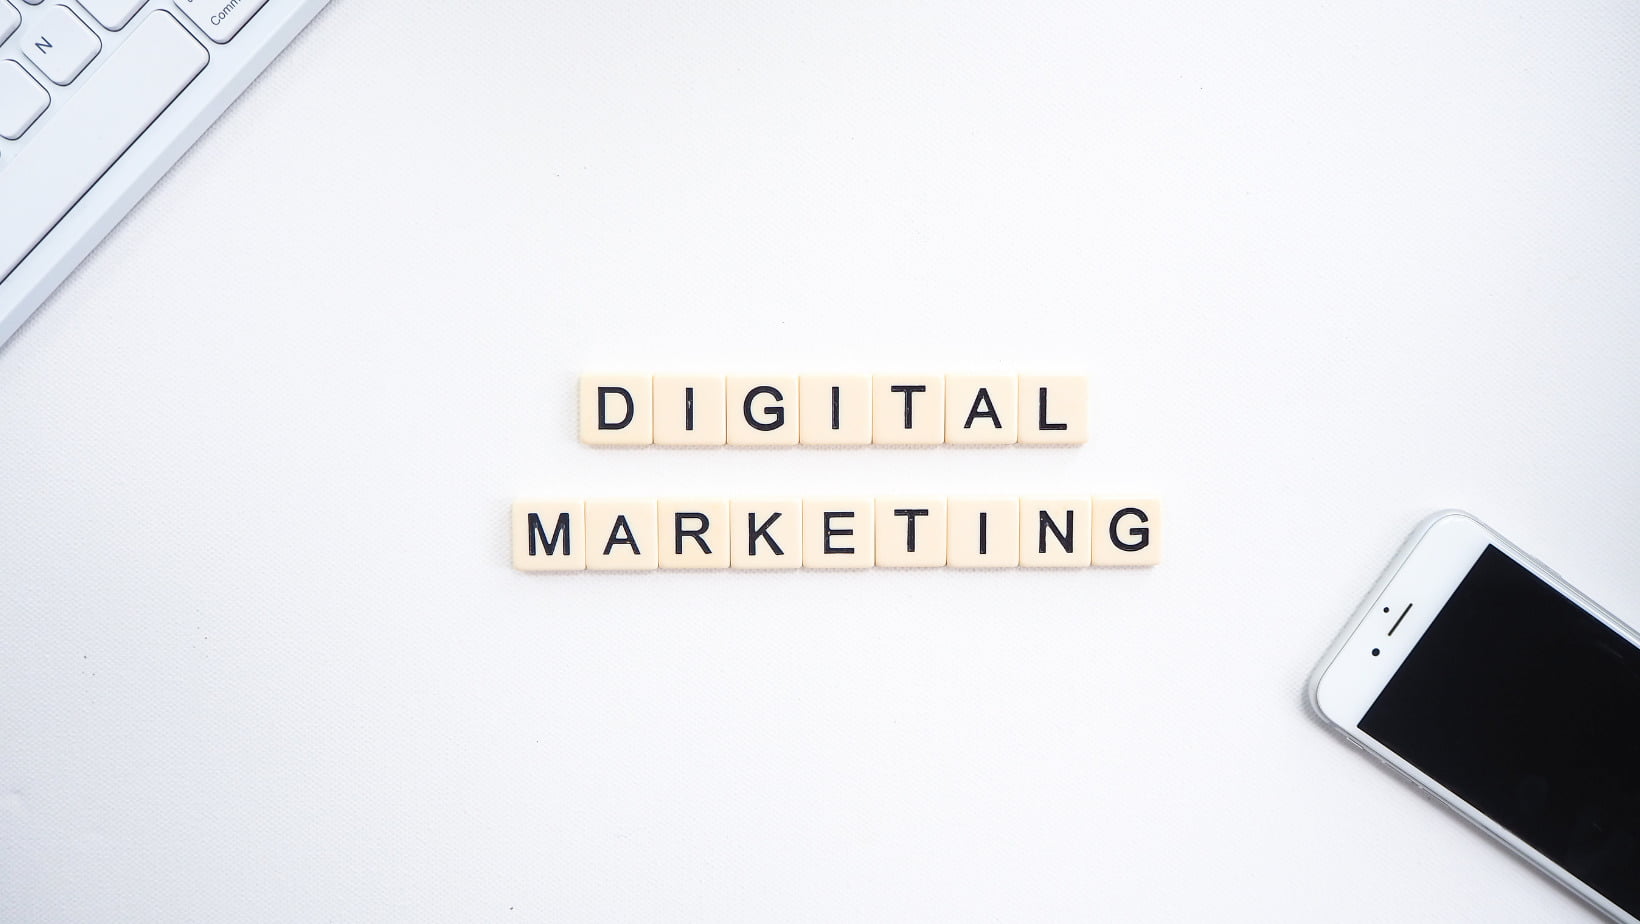 How digital marketing can influence your brand’s image